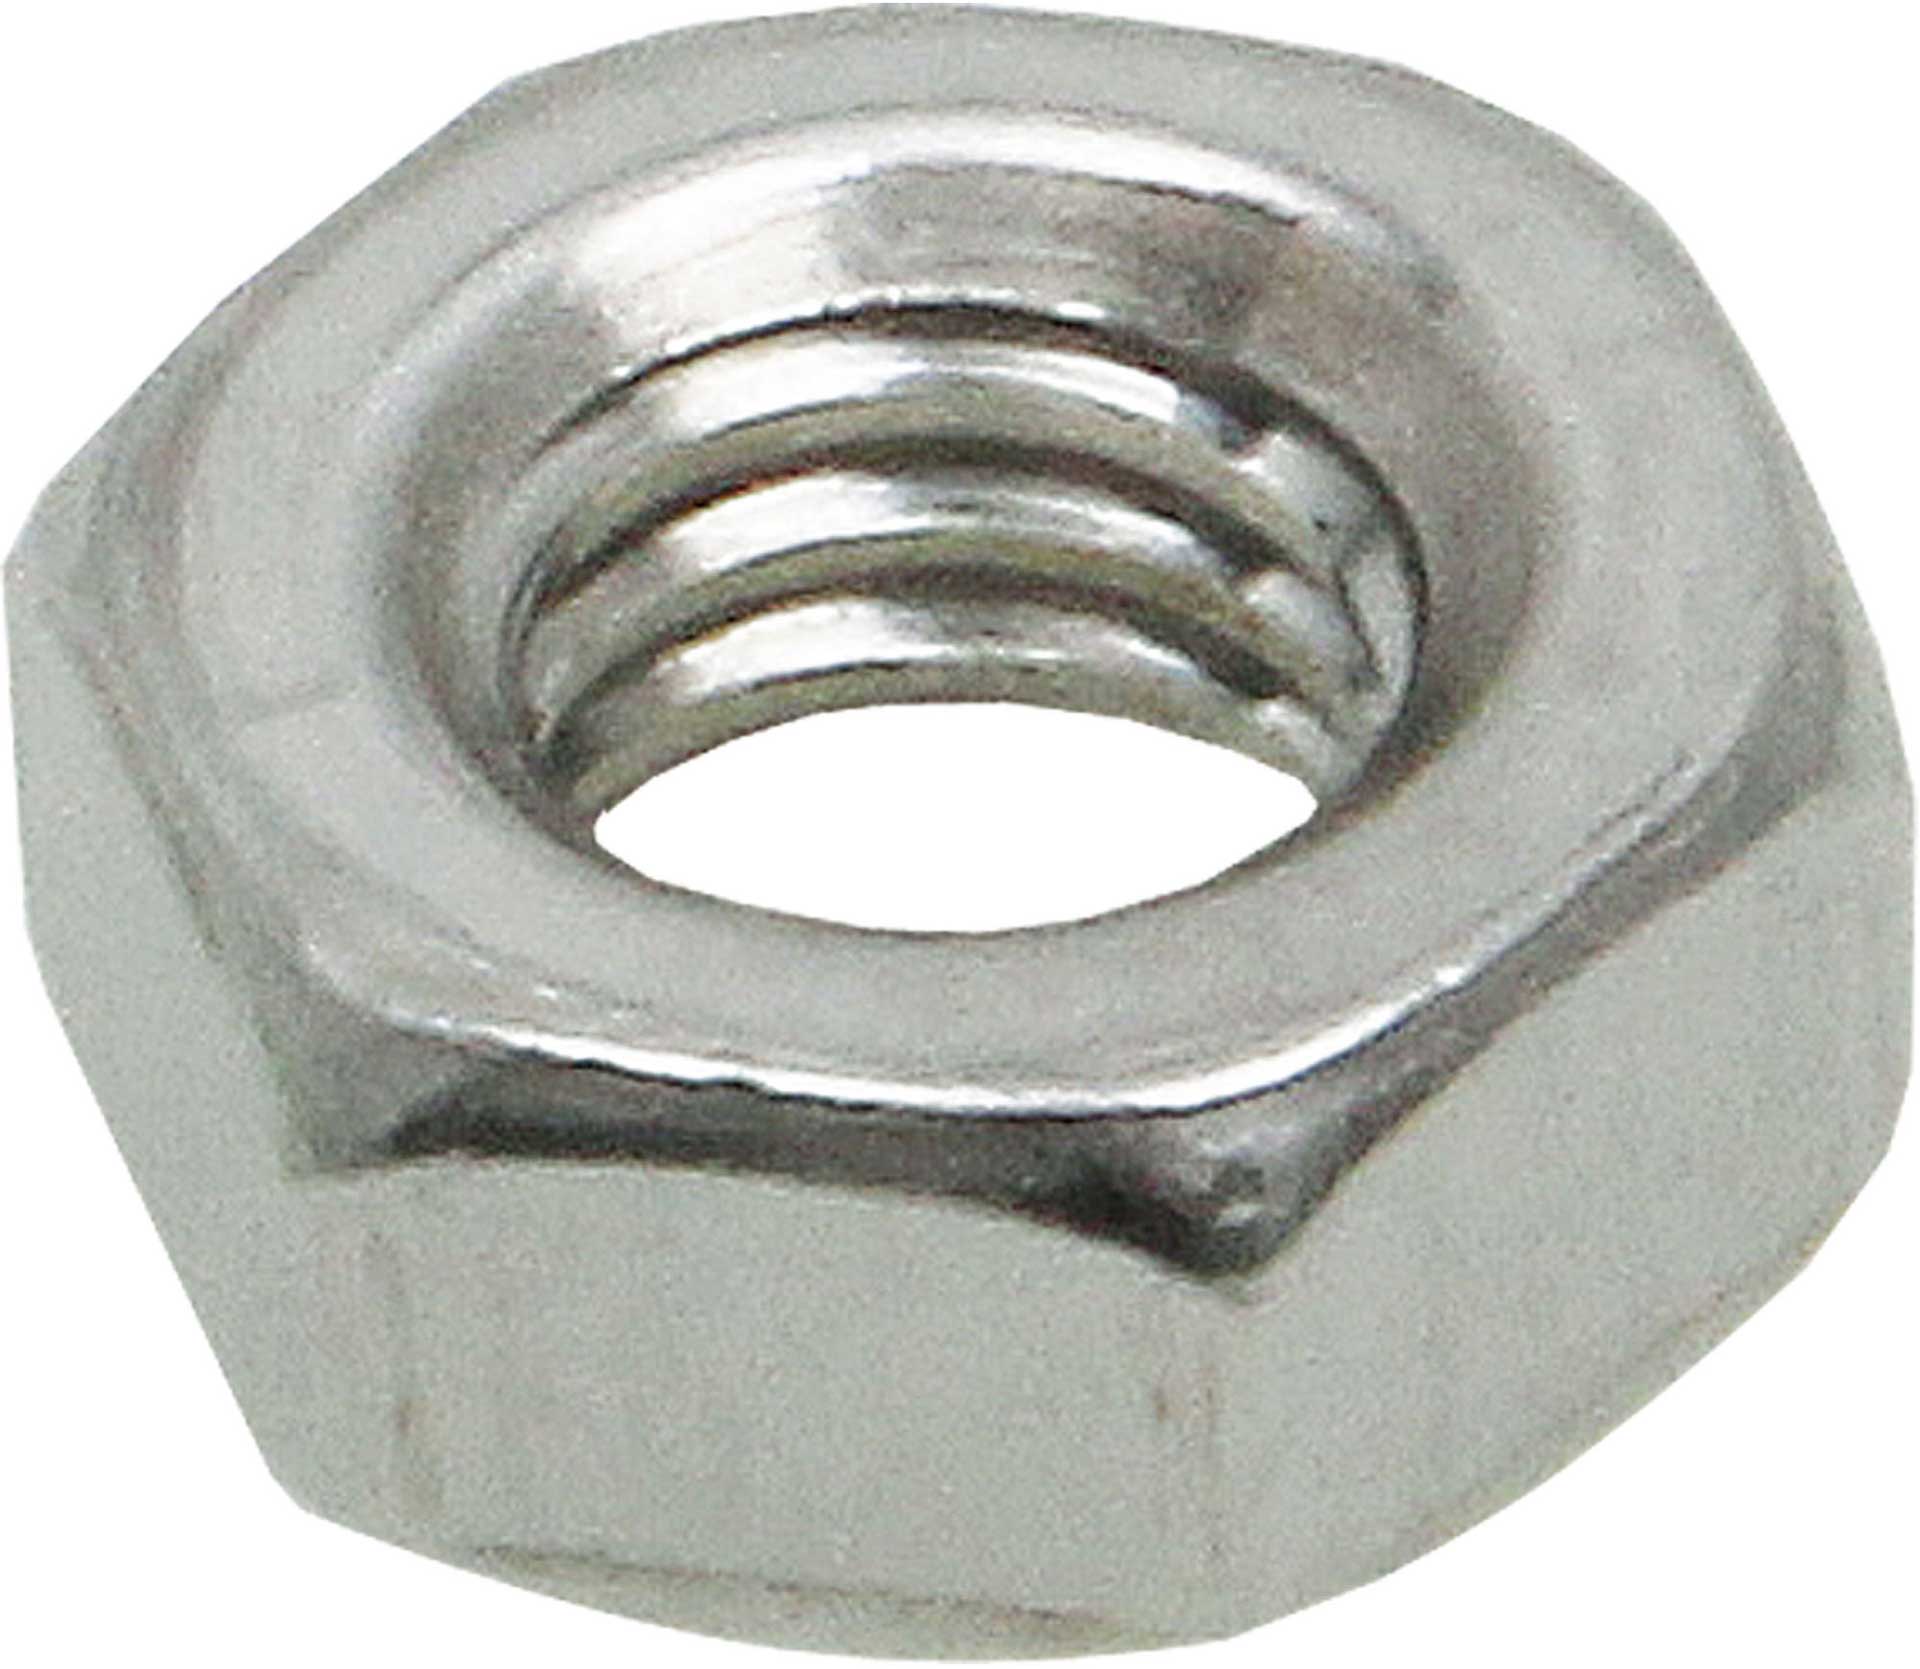 Modellbau Lindinger NUTS STAINLESS STEEL M2 10PCS.